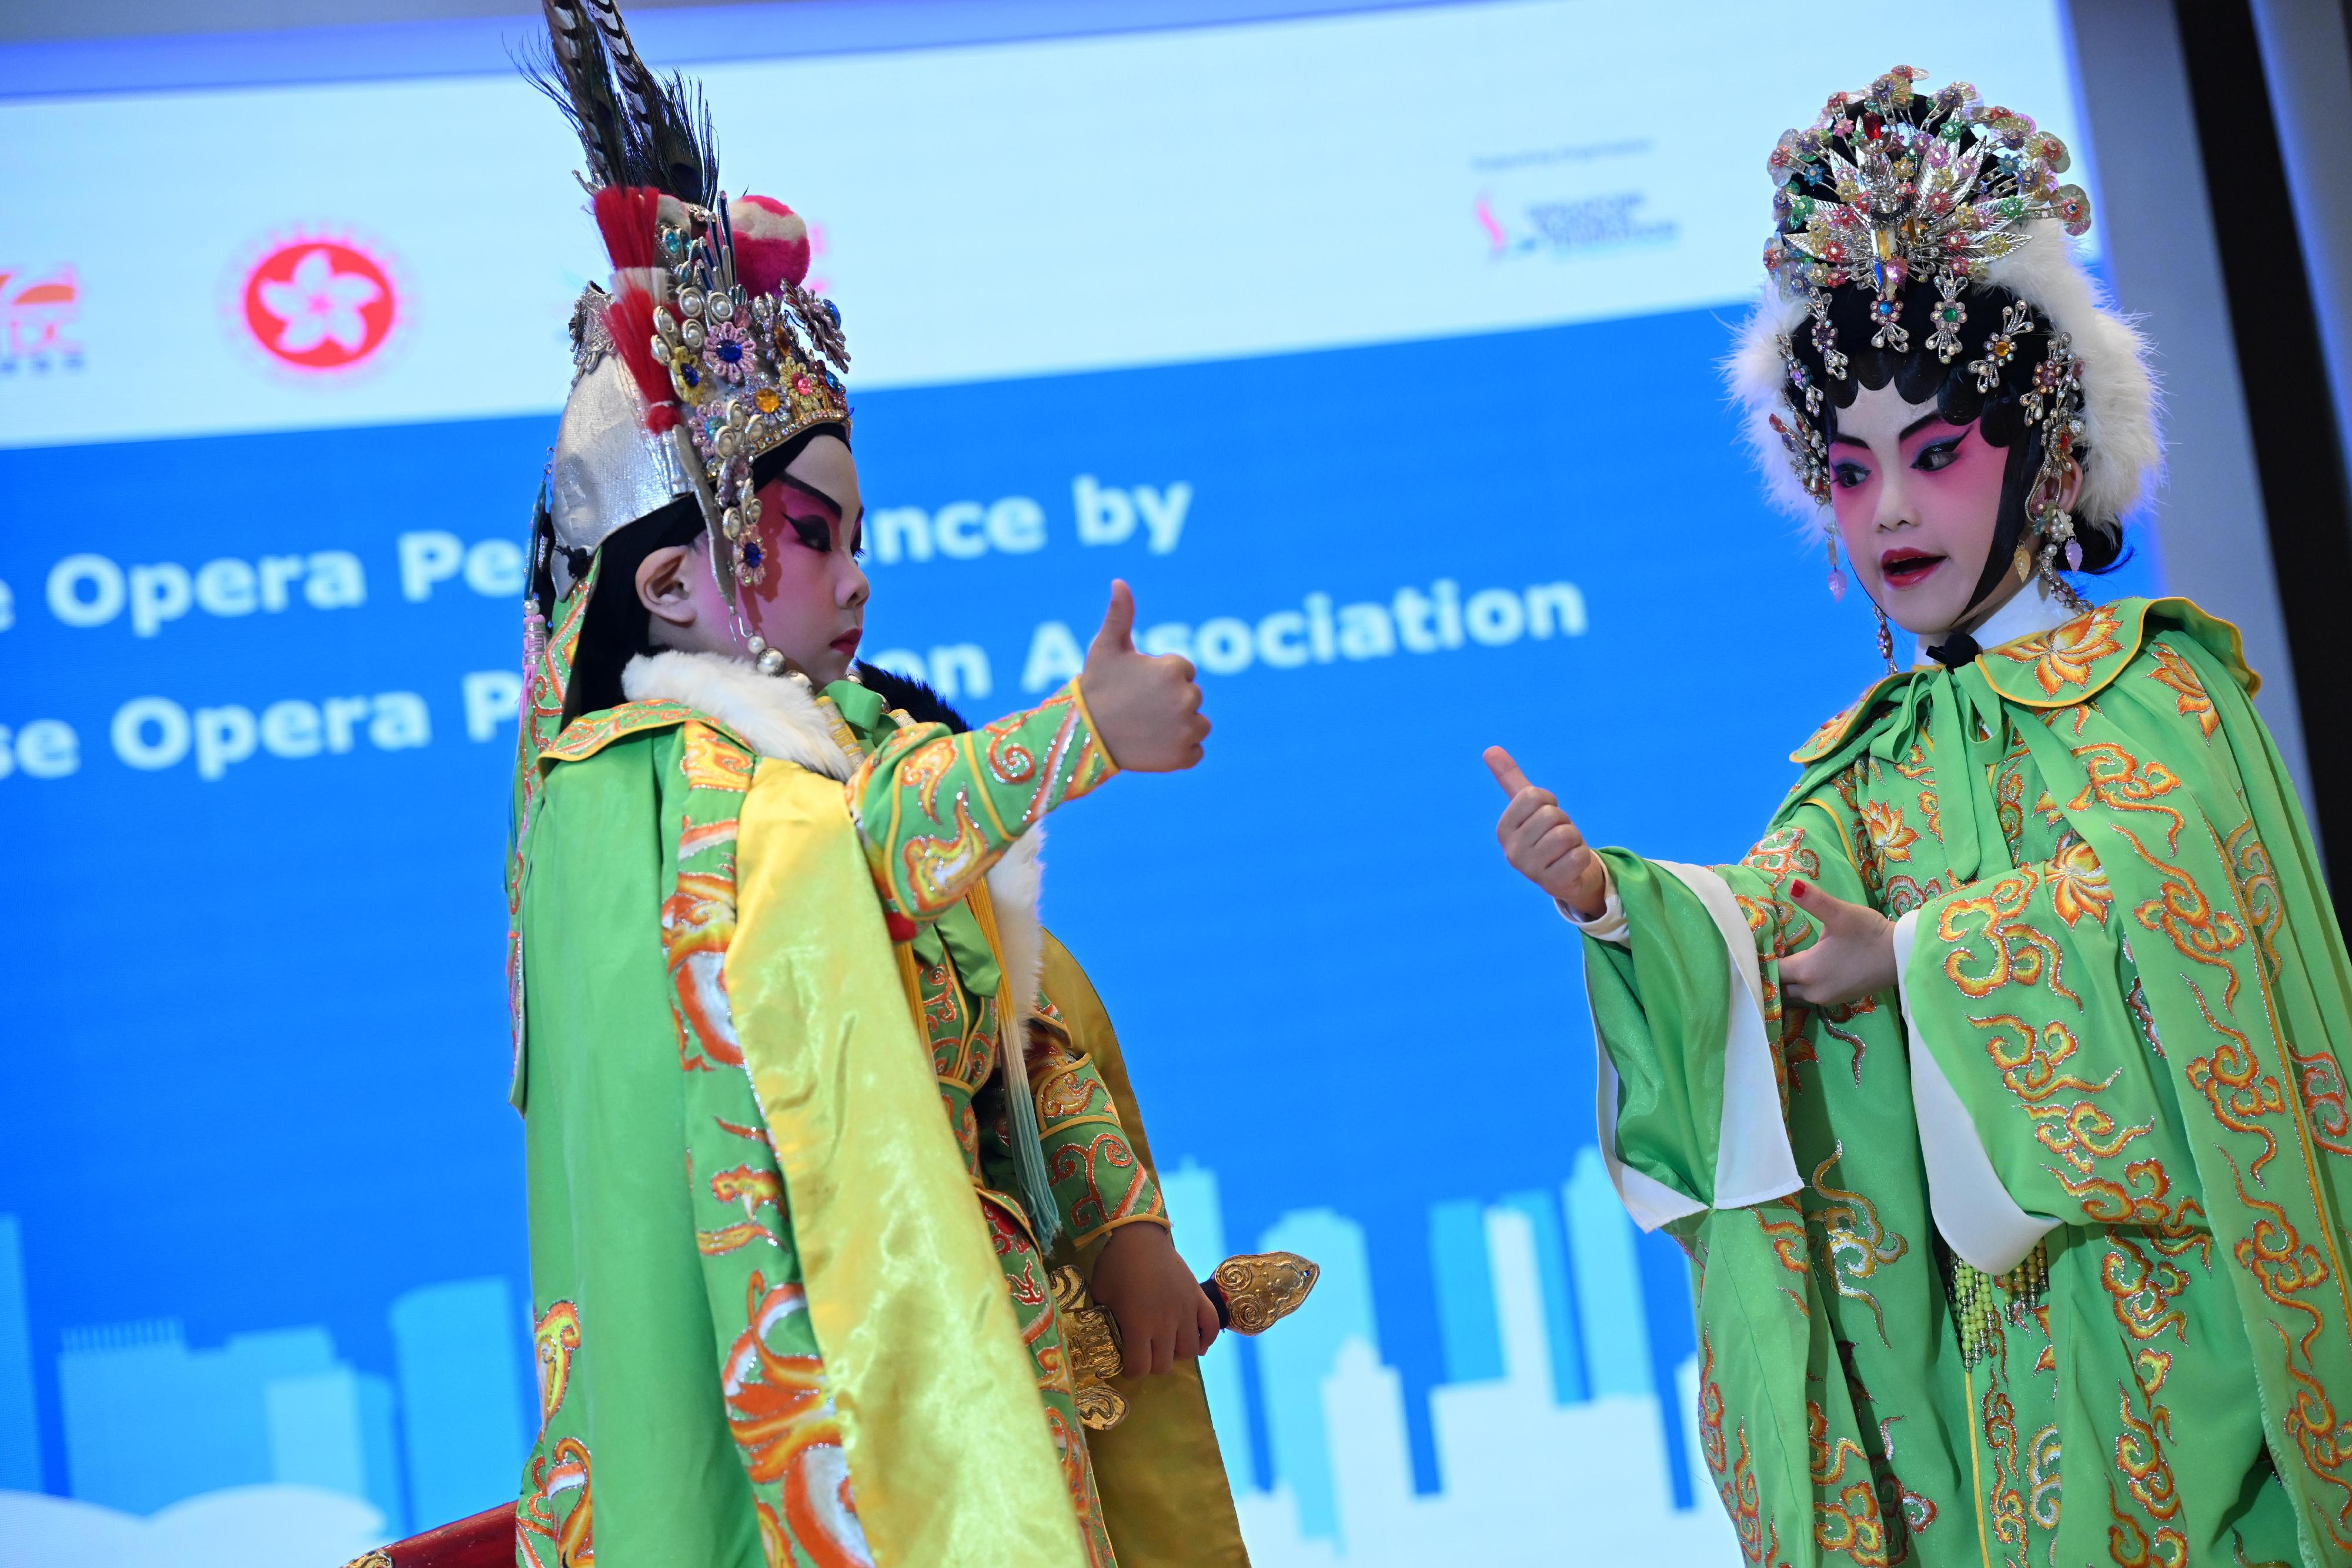 The Chief Executive, Mr John Lee, attended a business dinner in Singapore jointly organised by the Hong Kong Special Administrative Region Government and Hong Kong Trade Development Council today (July 24). Photo shows members of a children and youth Cantonese Opera group from Hong Kong performing at the dinner.